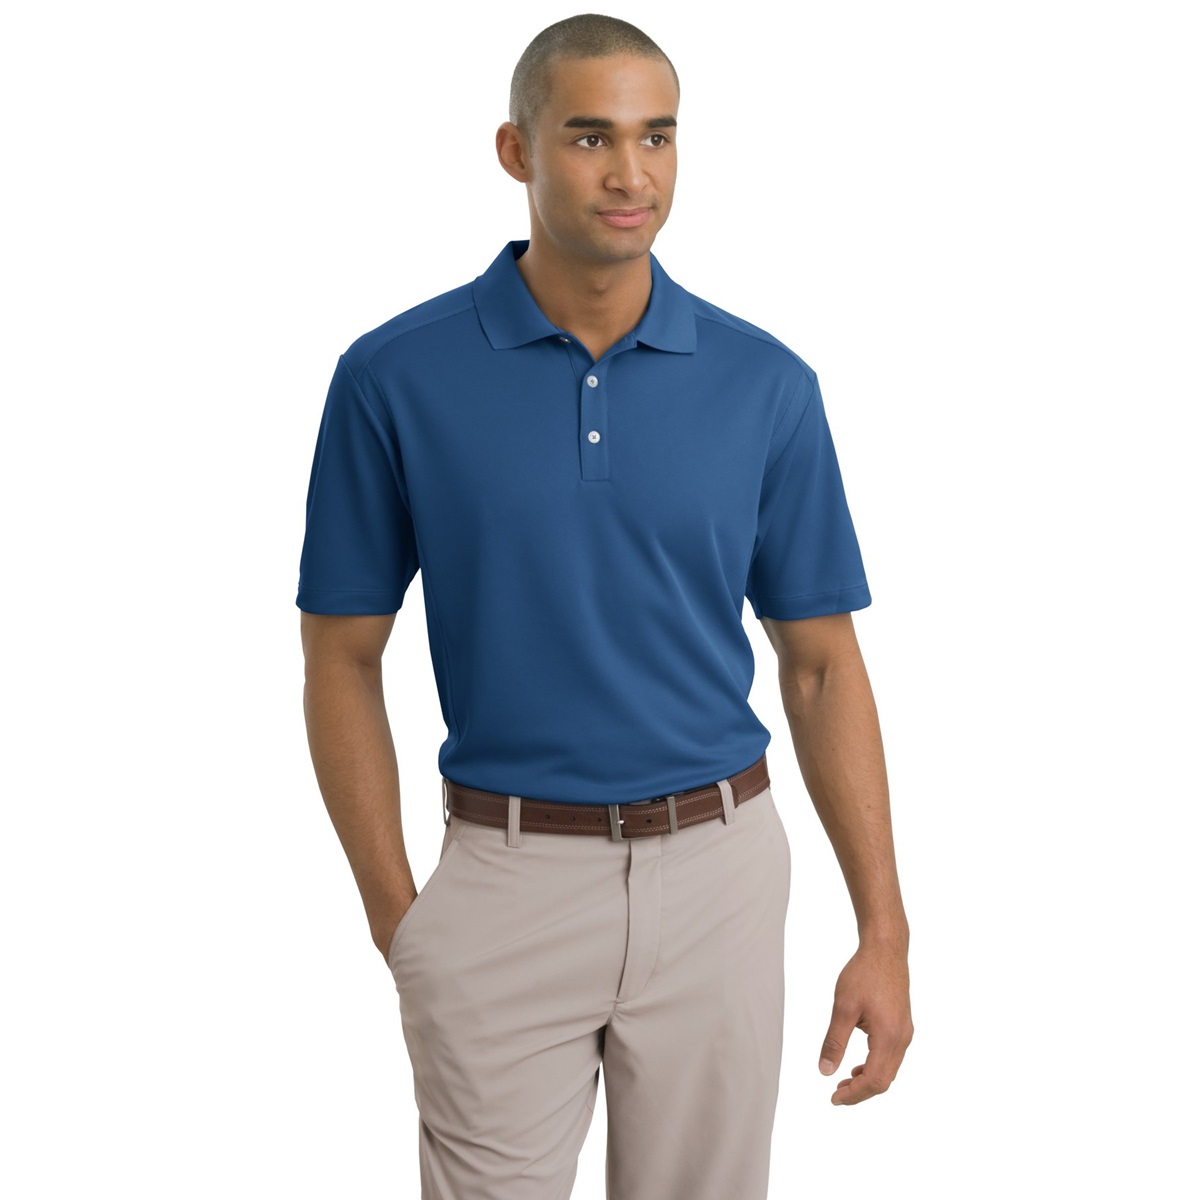 Nike 267020 Dri-FIT Classic Polo - French Blue